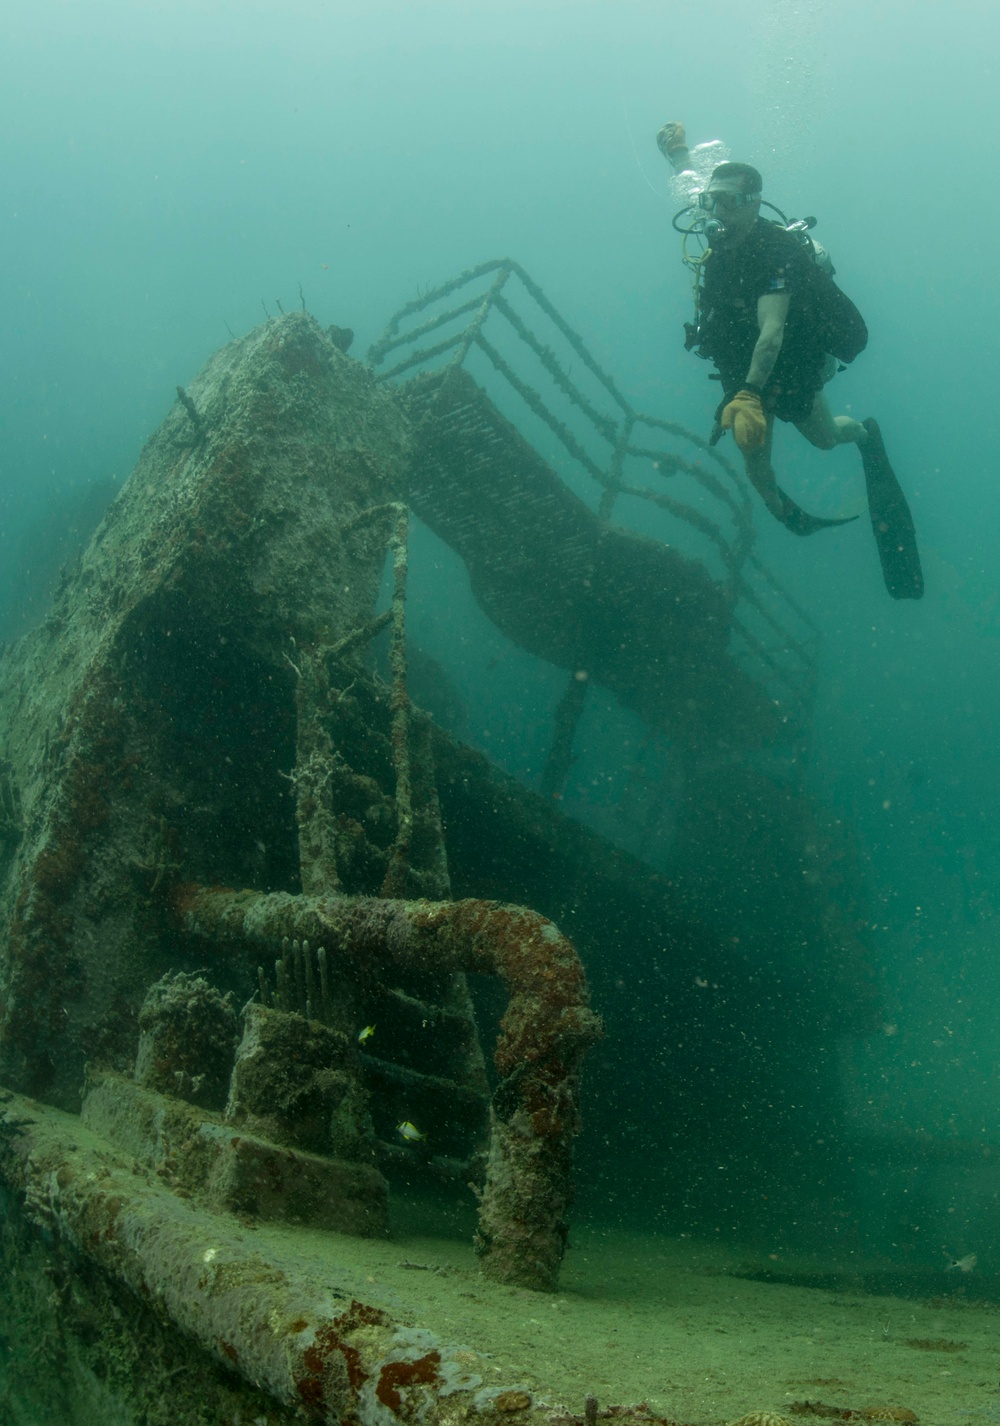 US Navy divers dive an underwater wreck with Colombian divers as part of Southern Partnership Station '14